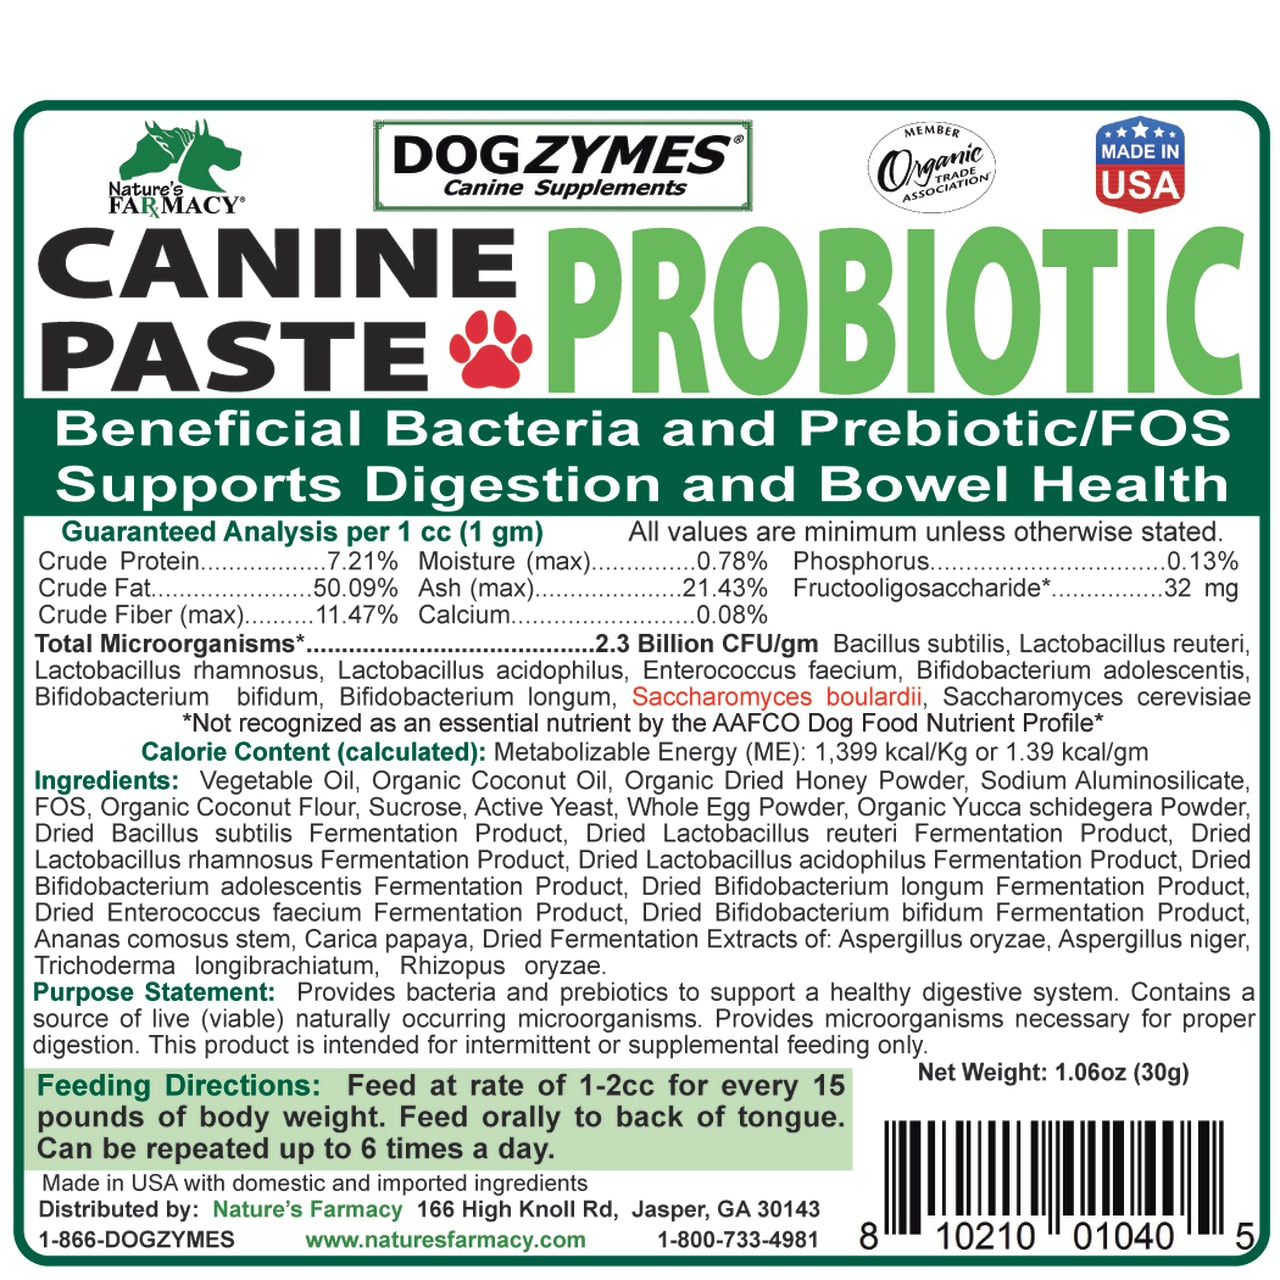 Nature's Farmacy Dogzymes Canine Probiotic Paste For Dogs, 30g